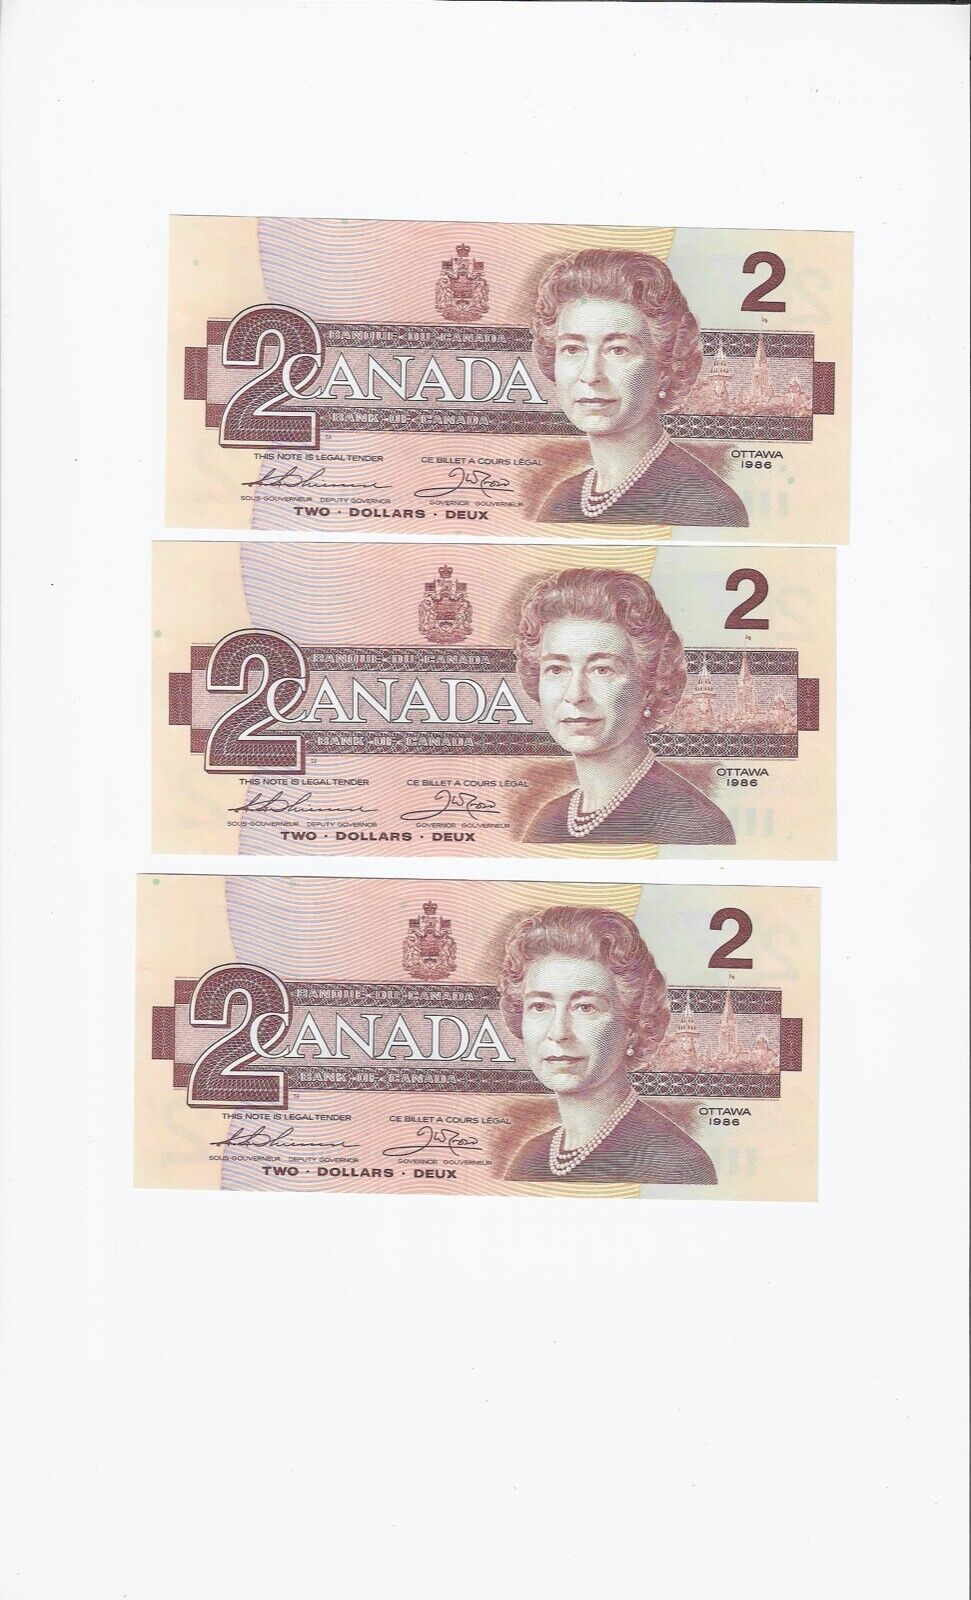 1986  Canada $2 Note BC-55b Thi/Cro Ser# BUY 0943101/02/03,  3 Sequential